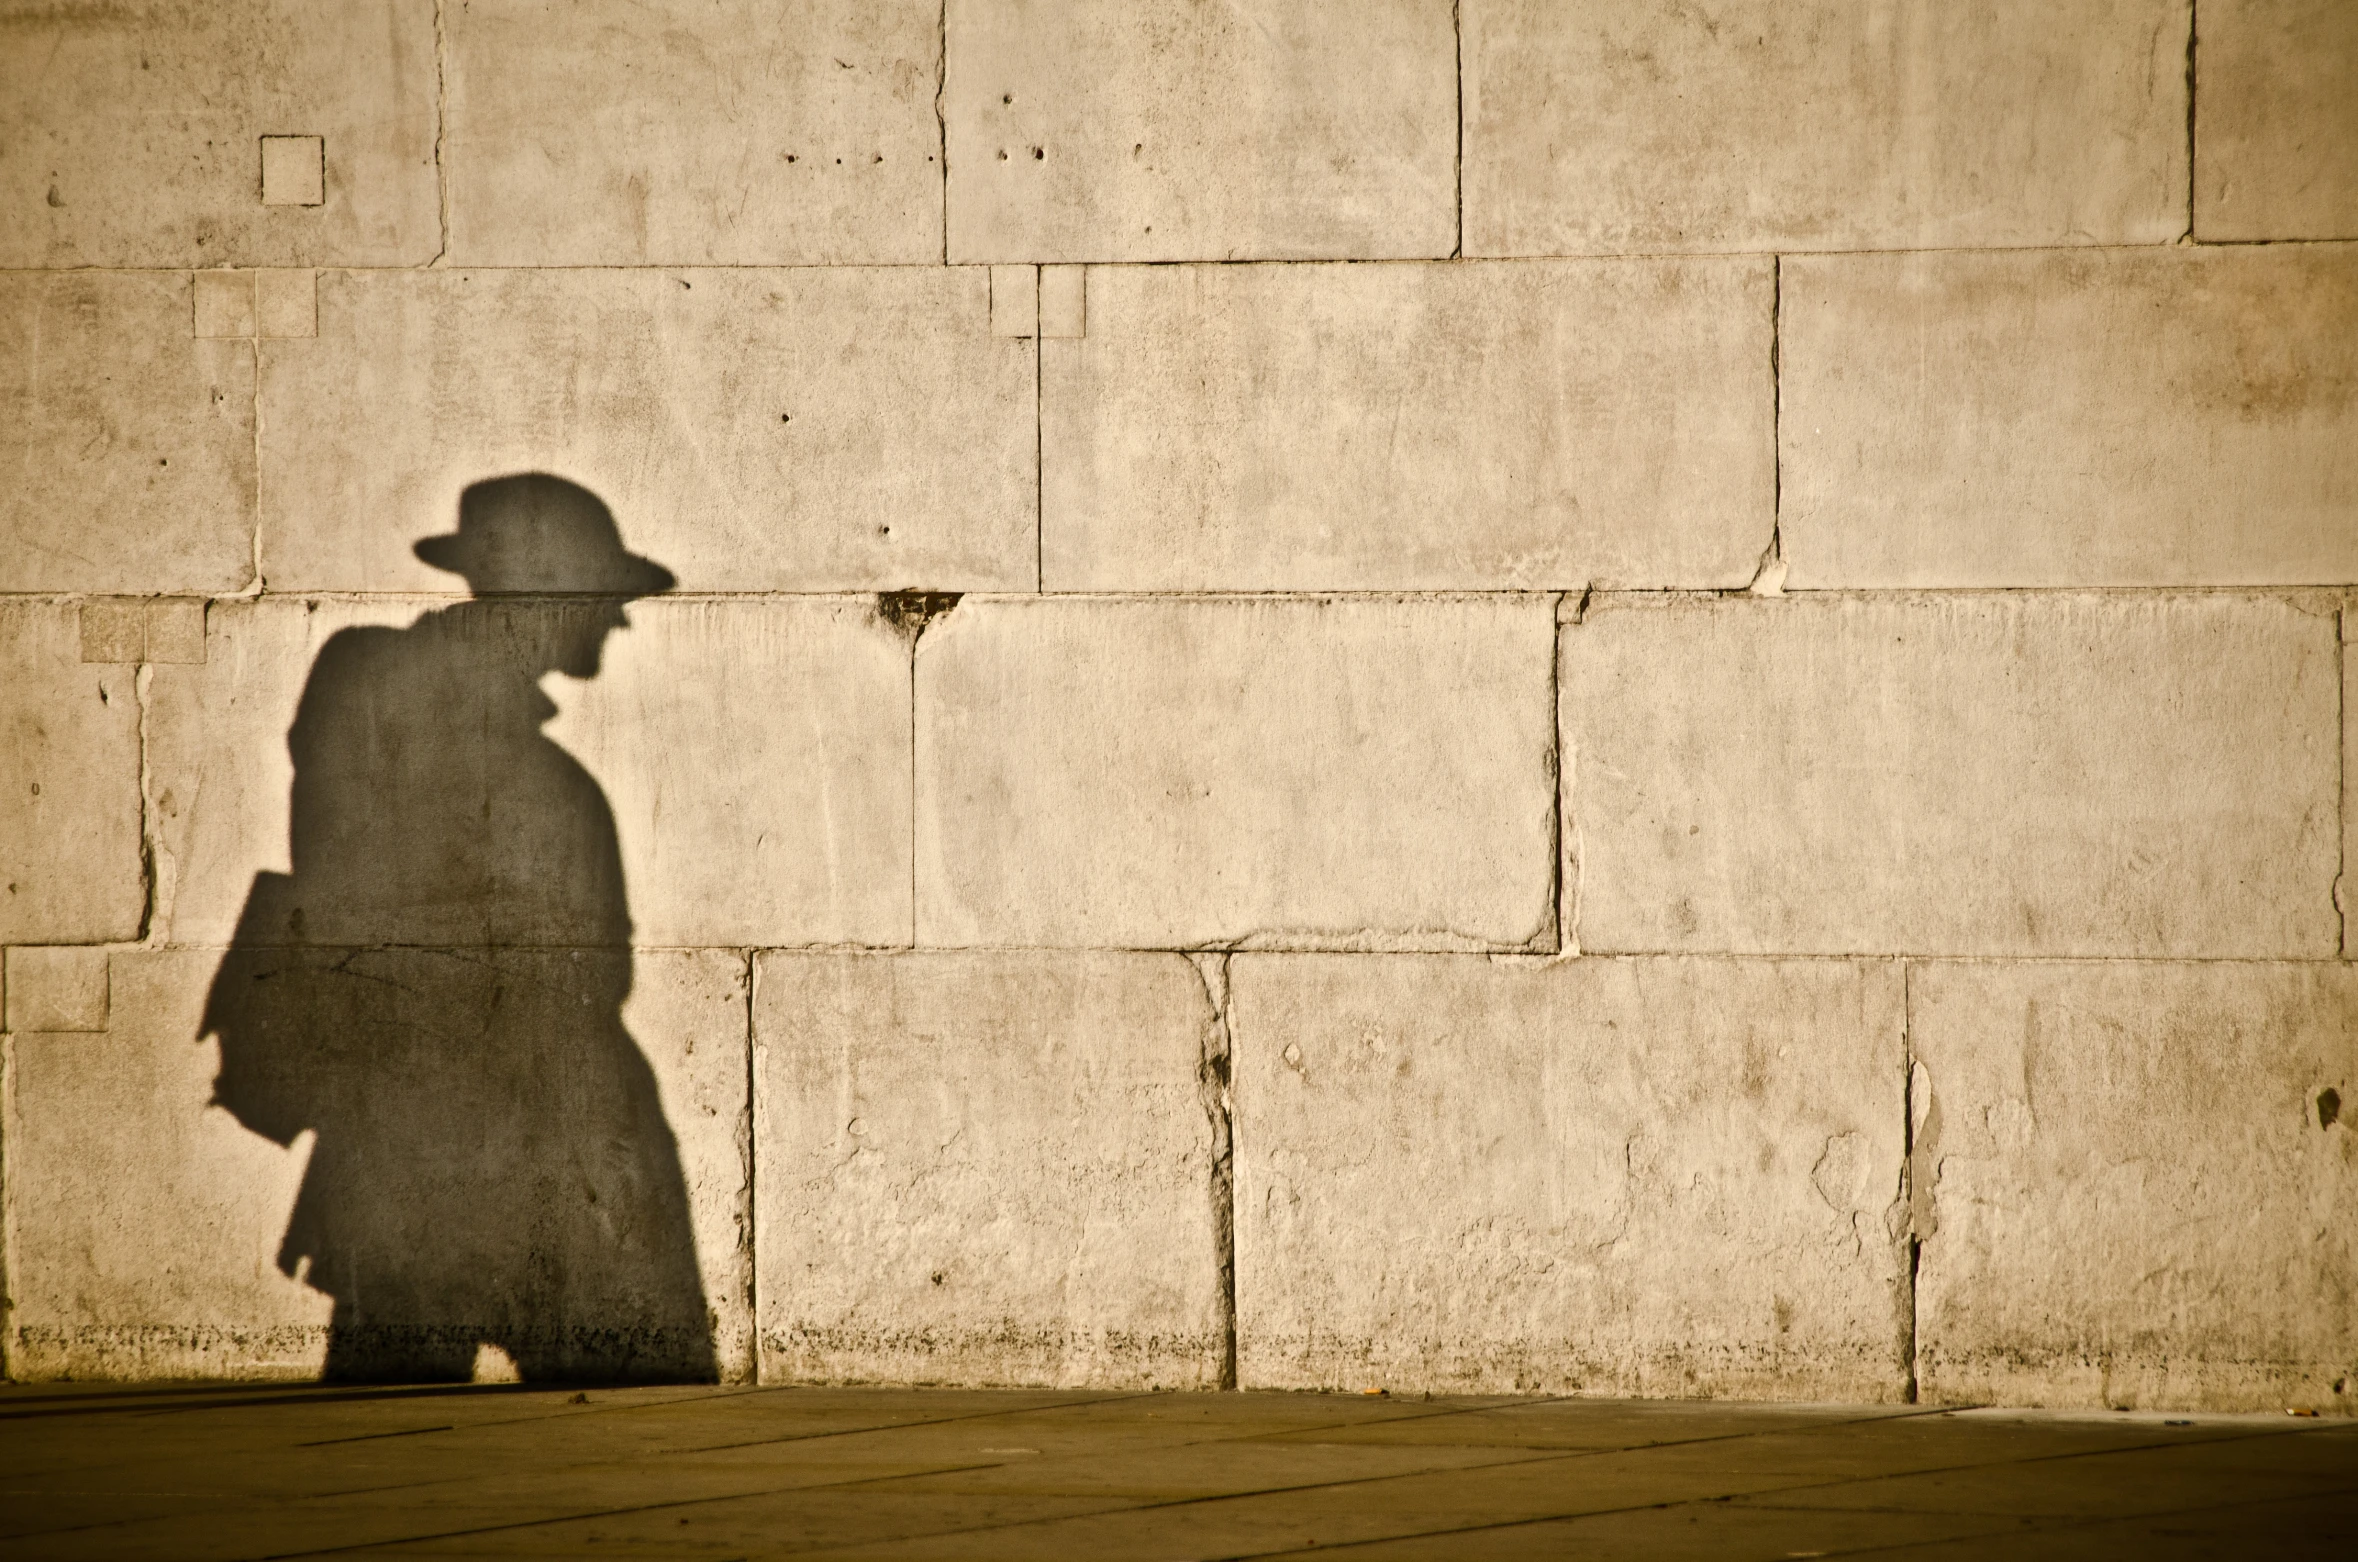 an older person with a hat and a backpack walks past a concrete wall